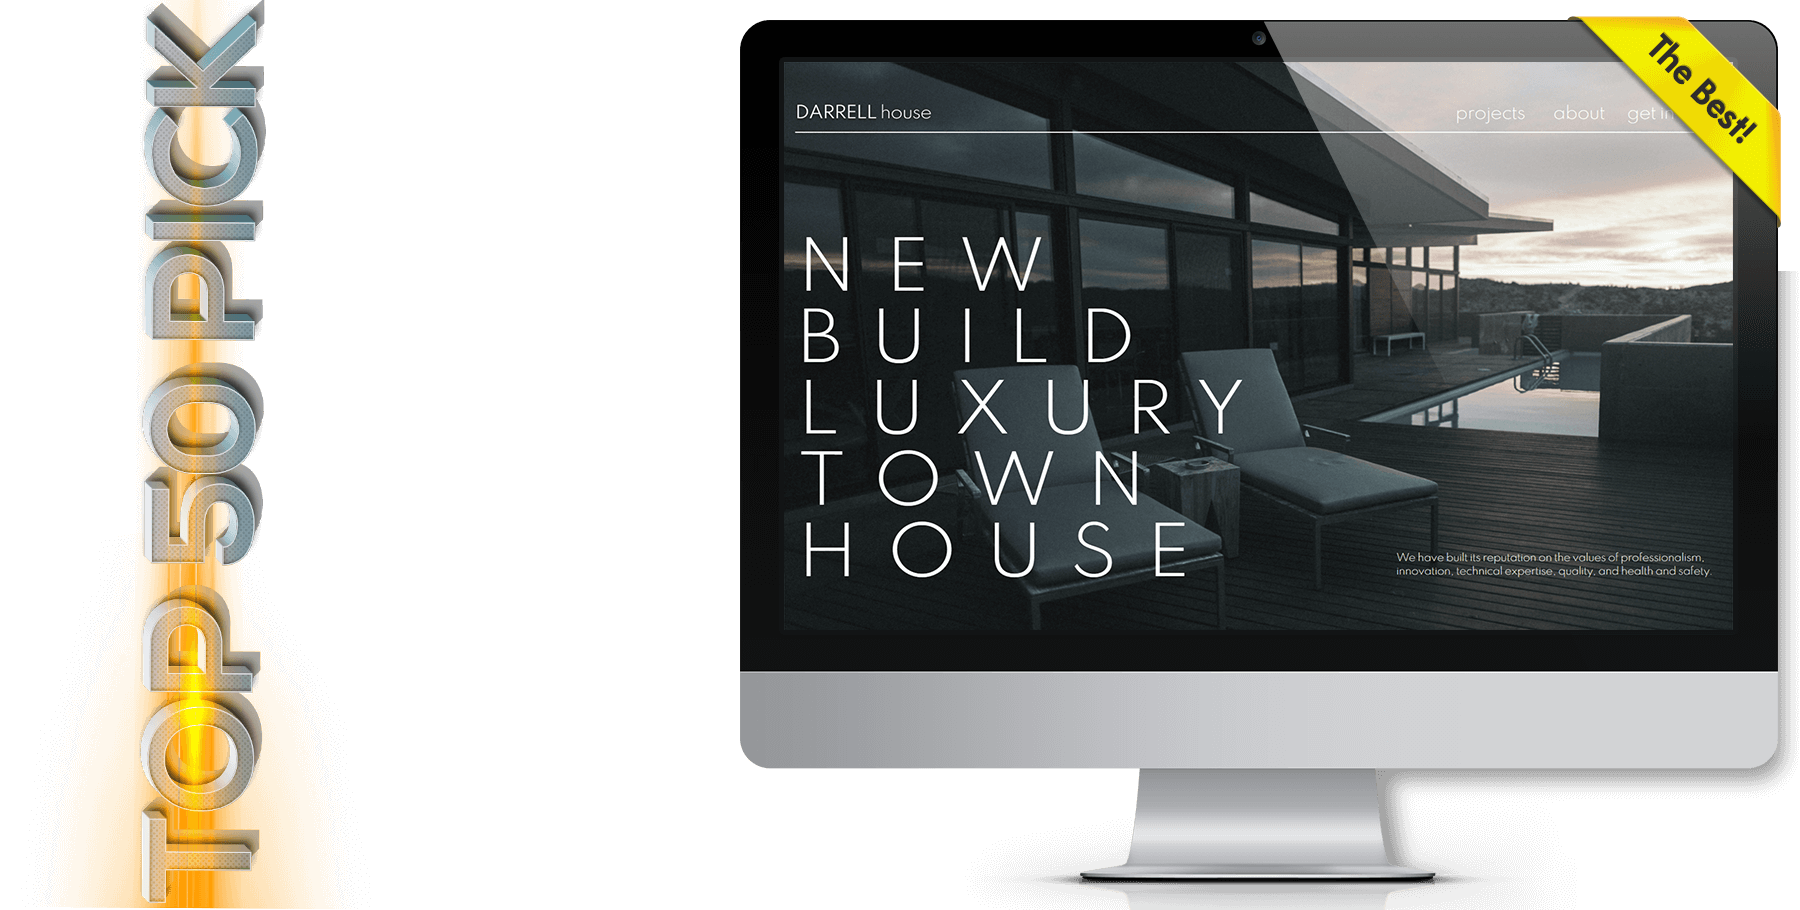 A website design in construction named Darrell House